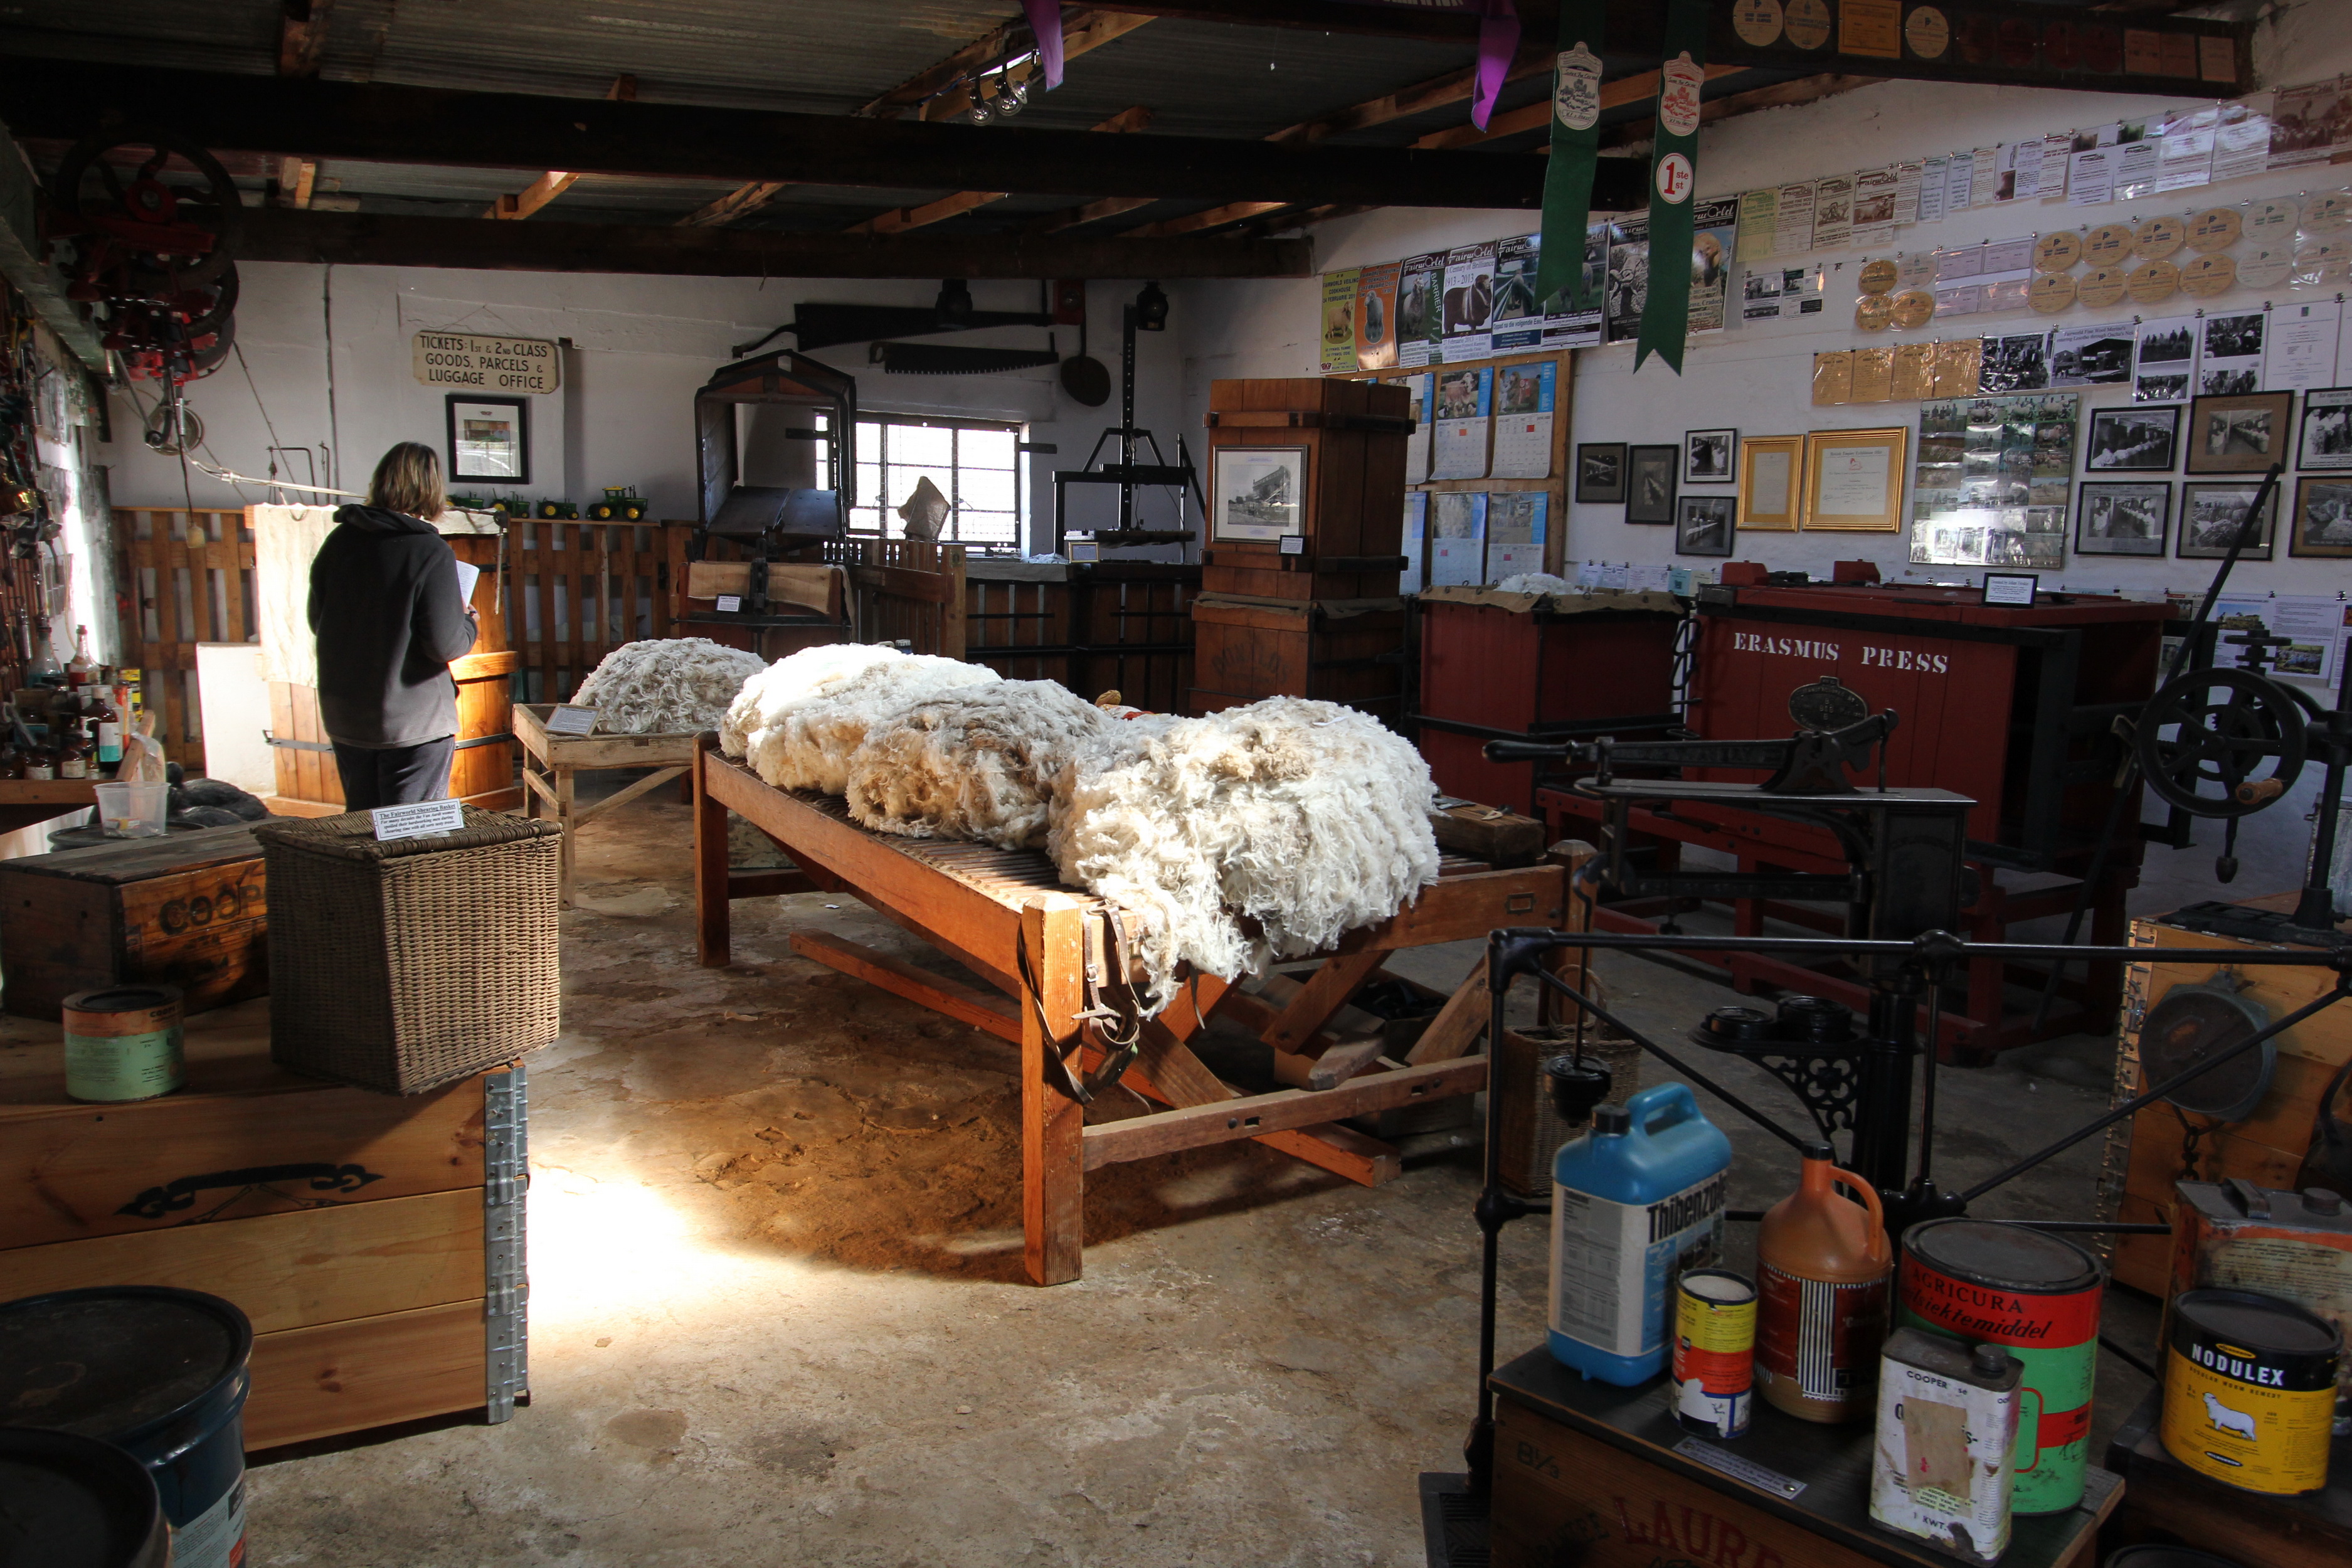 Flocking to a sheep museum in the Karoo